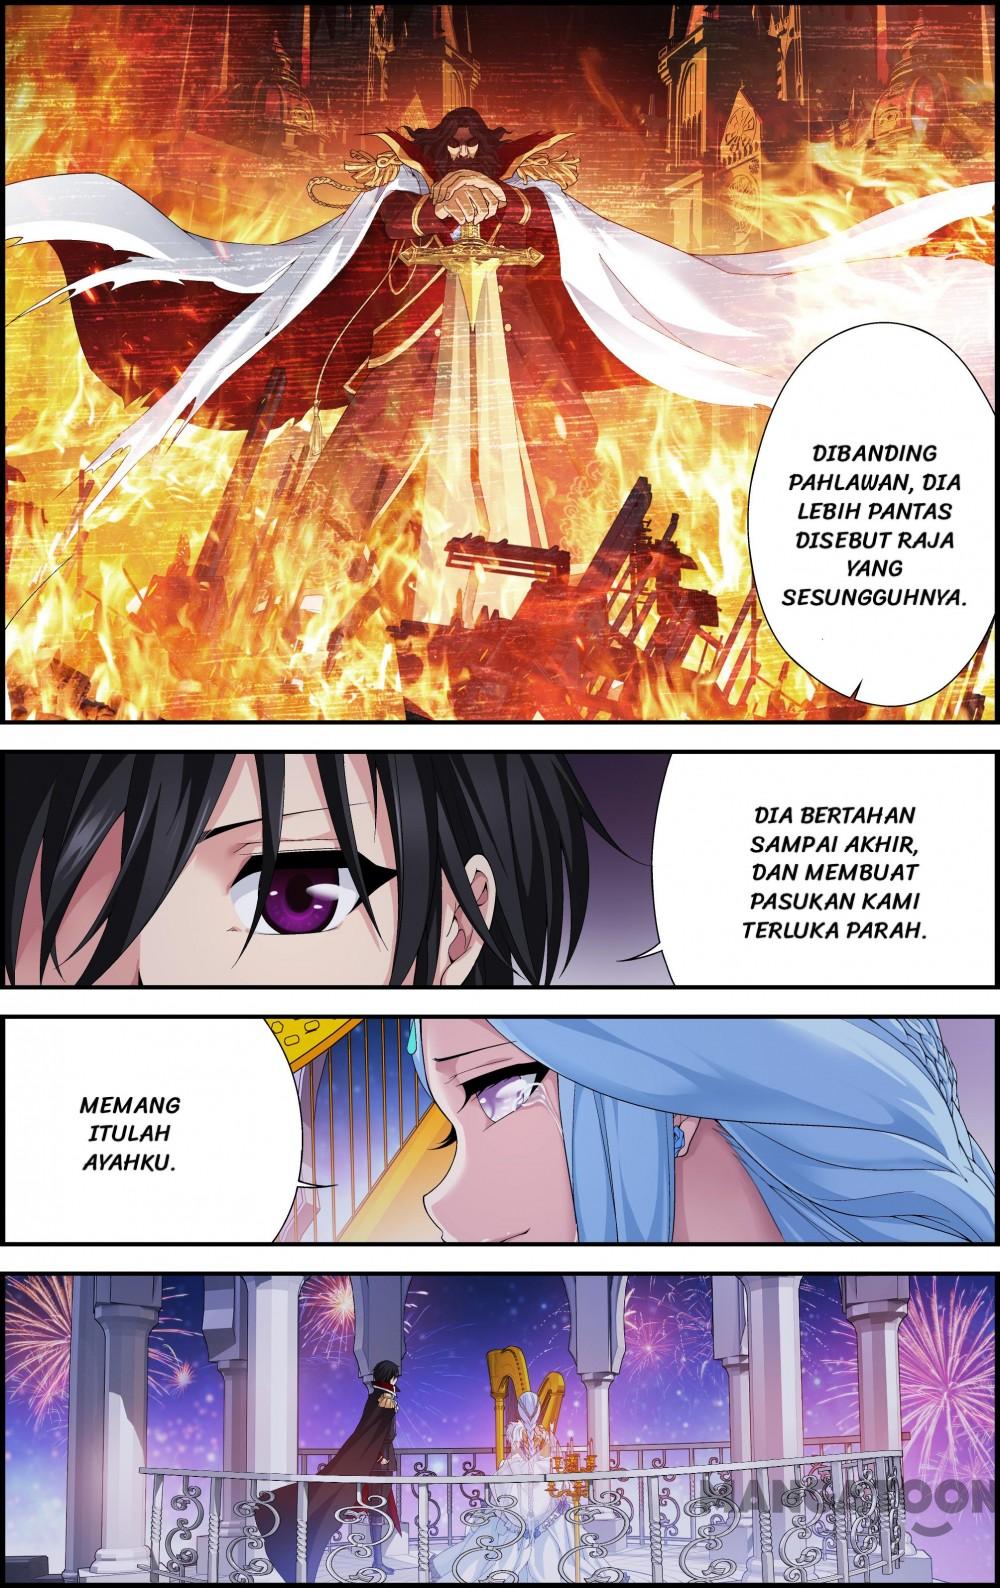 Flaming Heaven: The Dragon returns Chapter 2